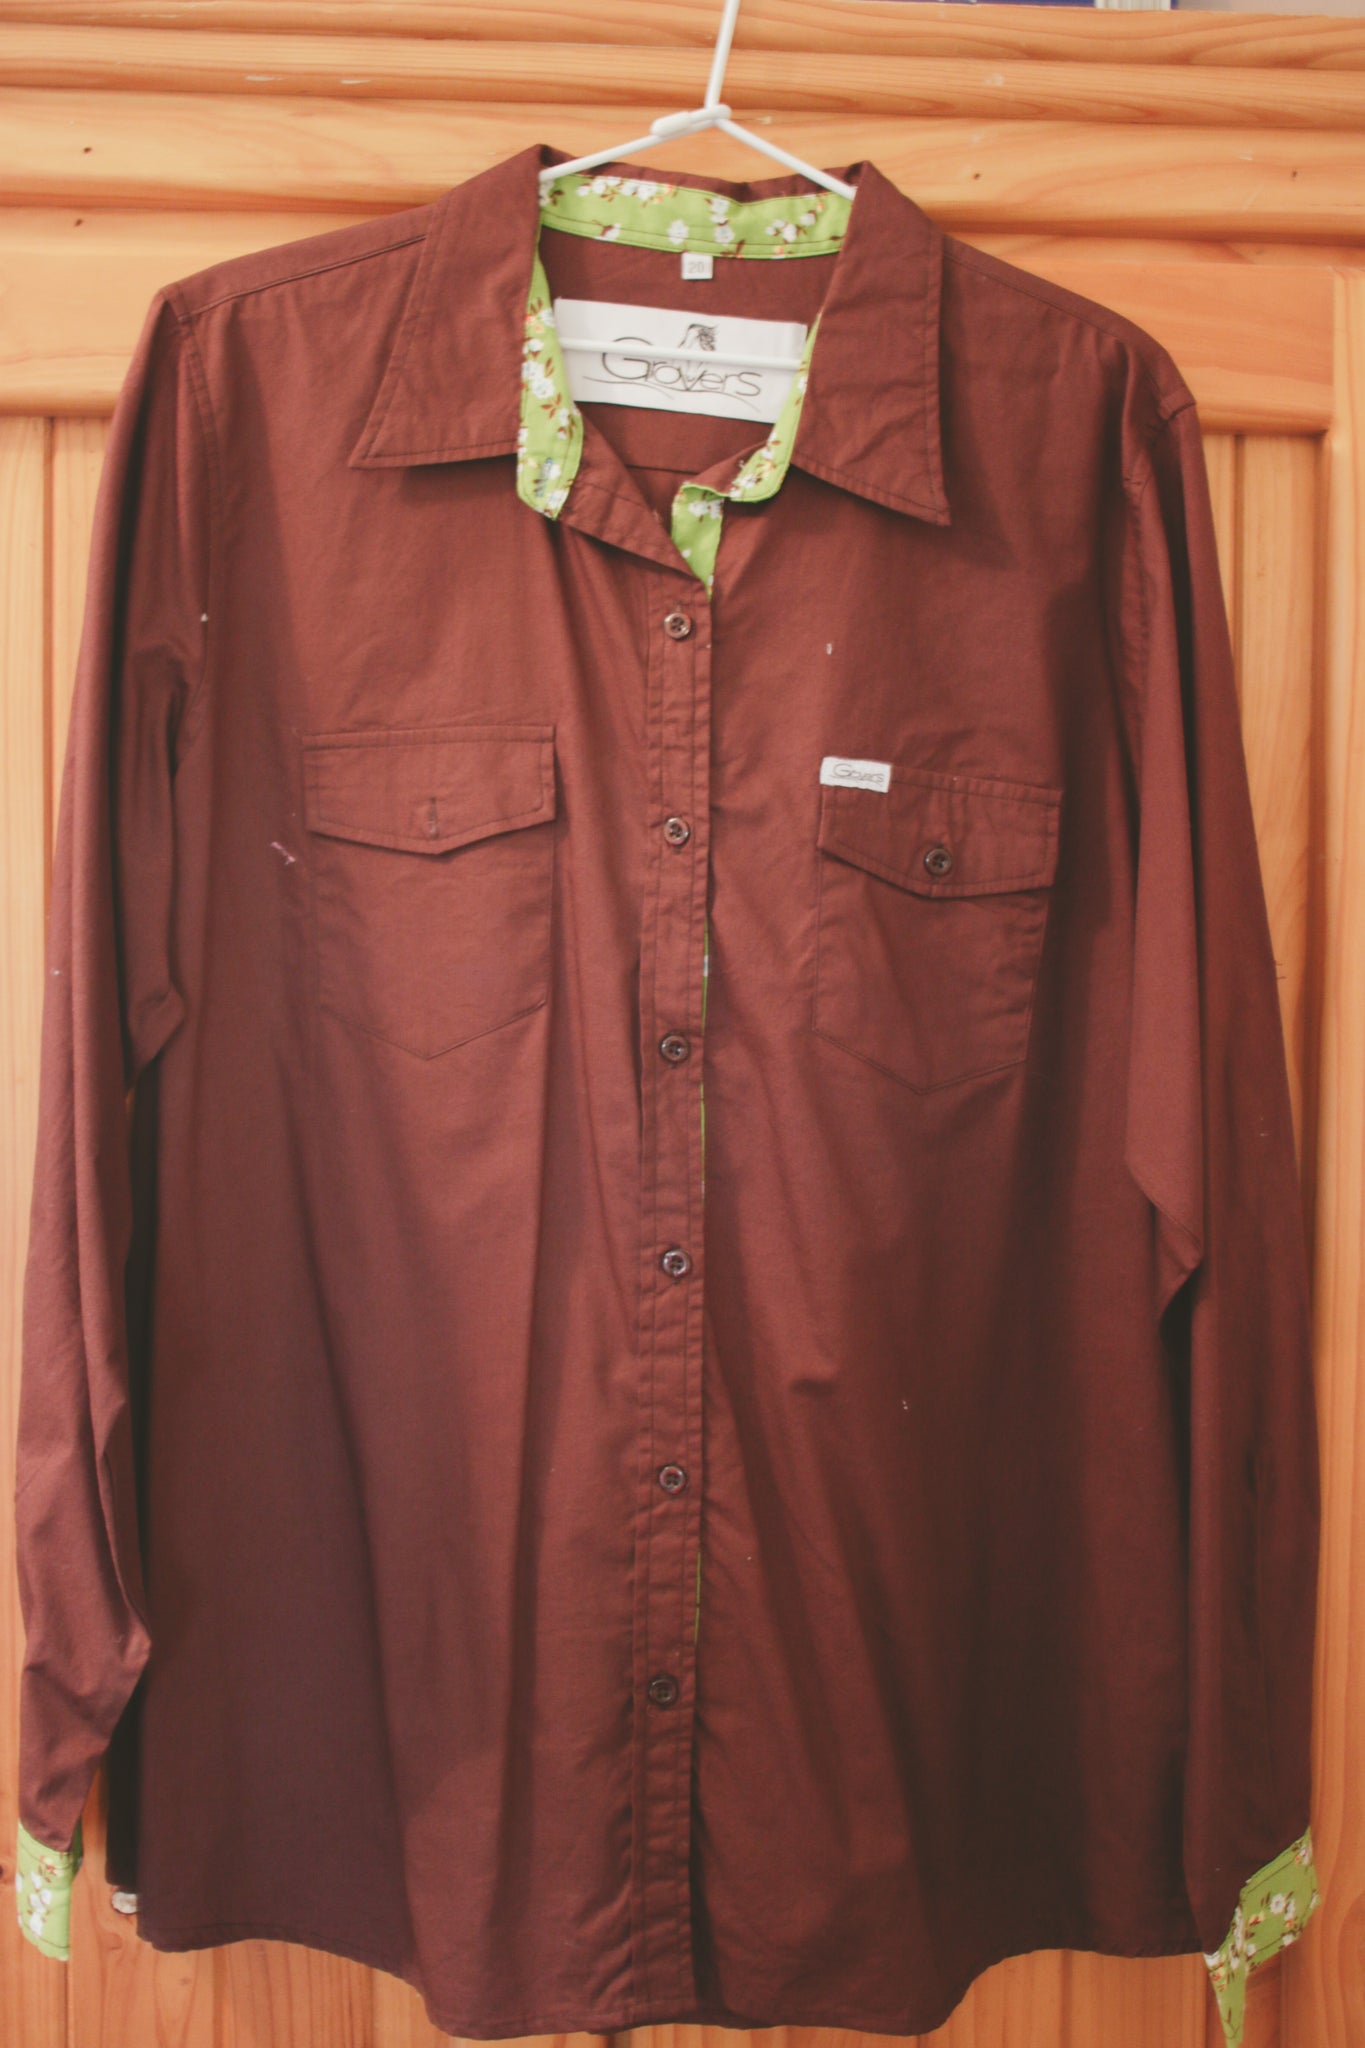 Grovers brown with green shirt